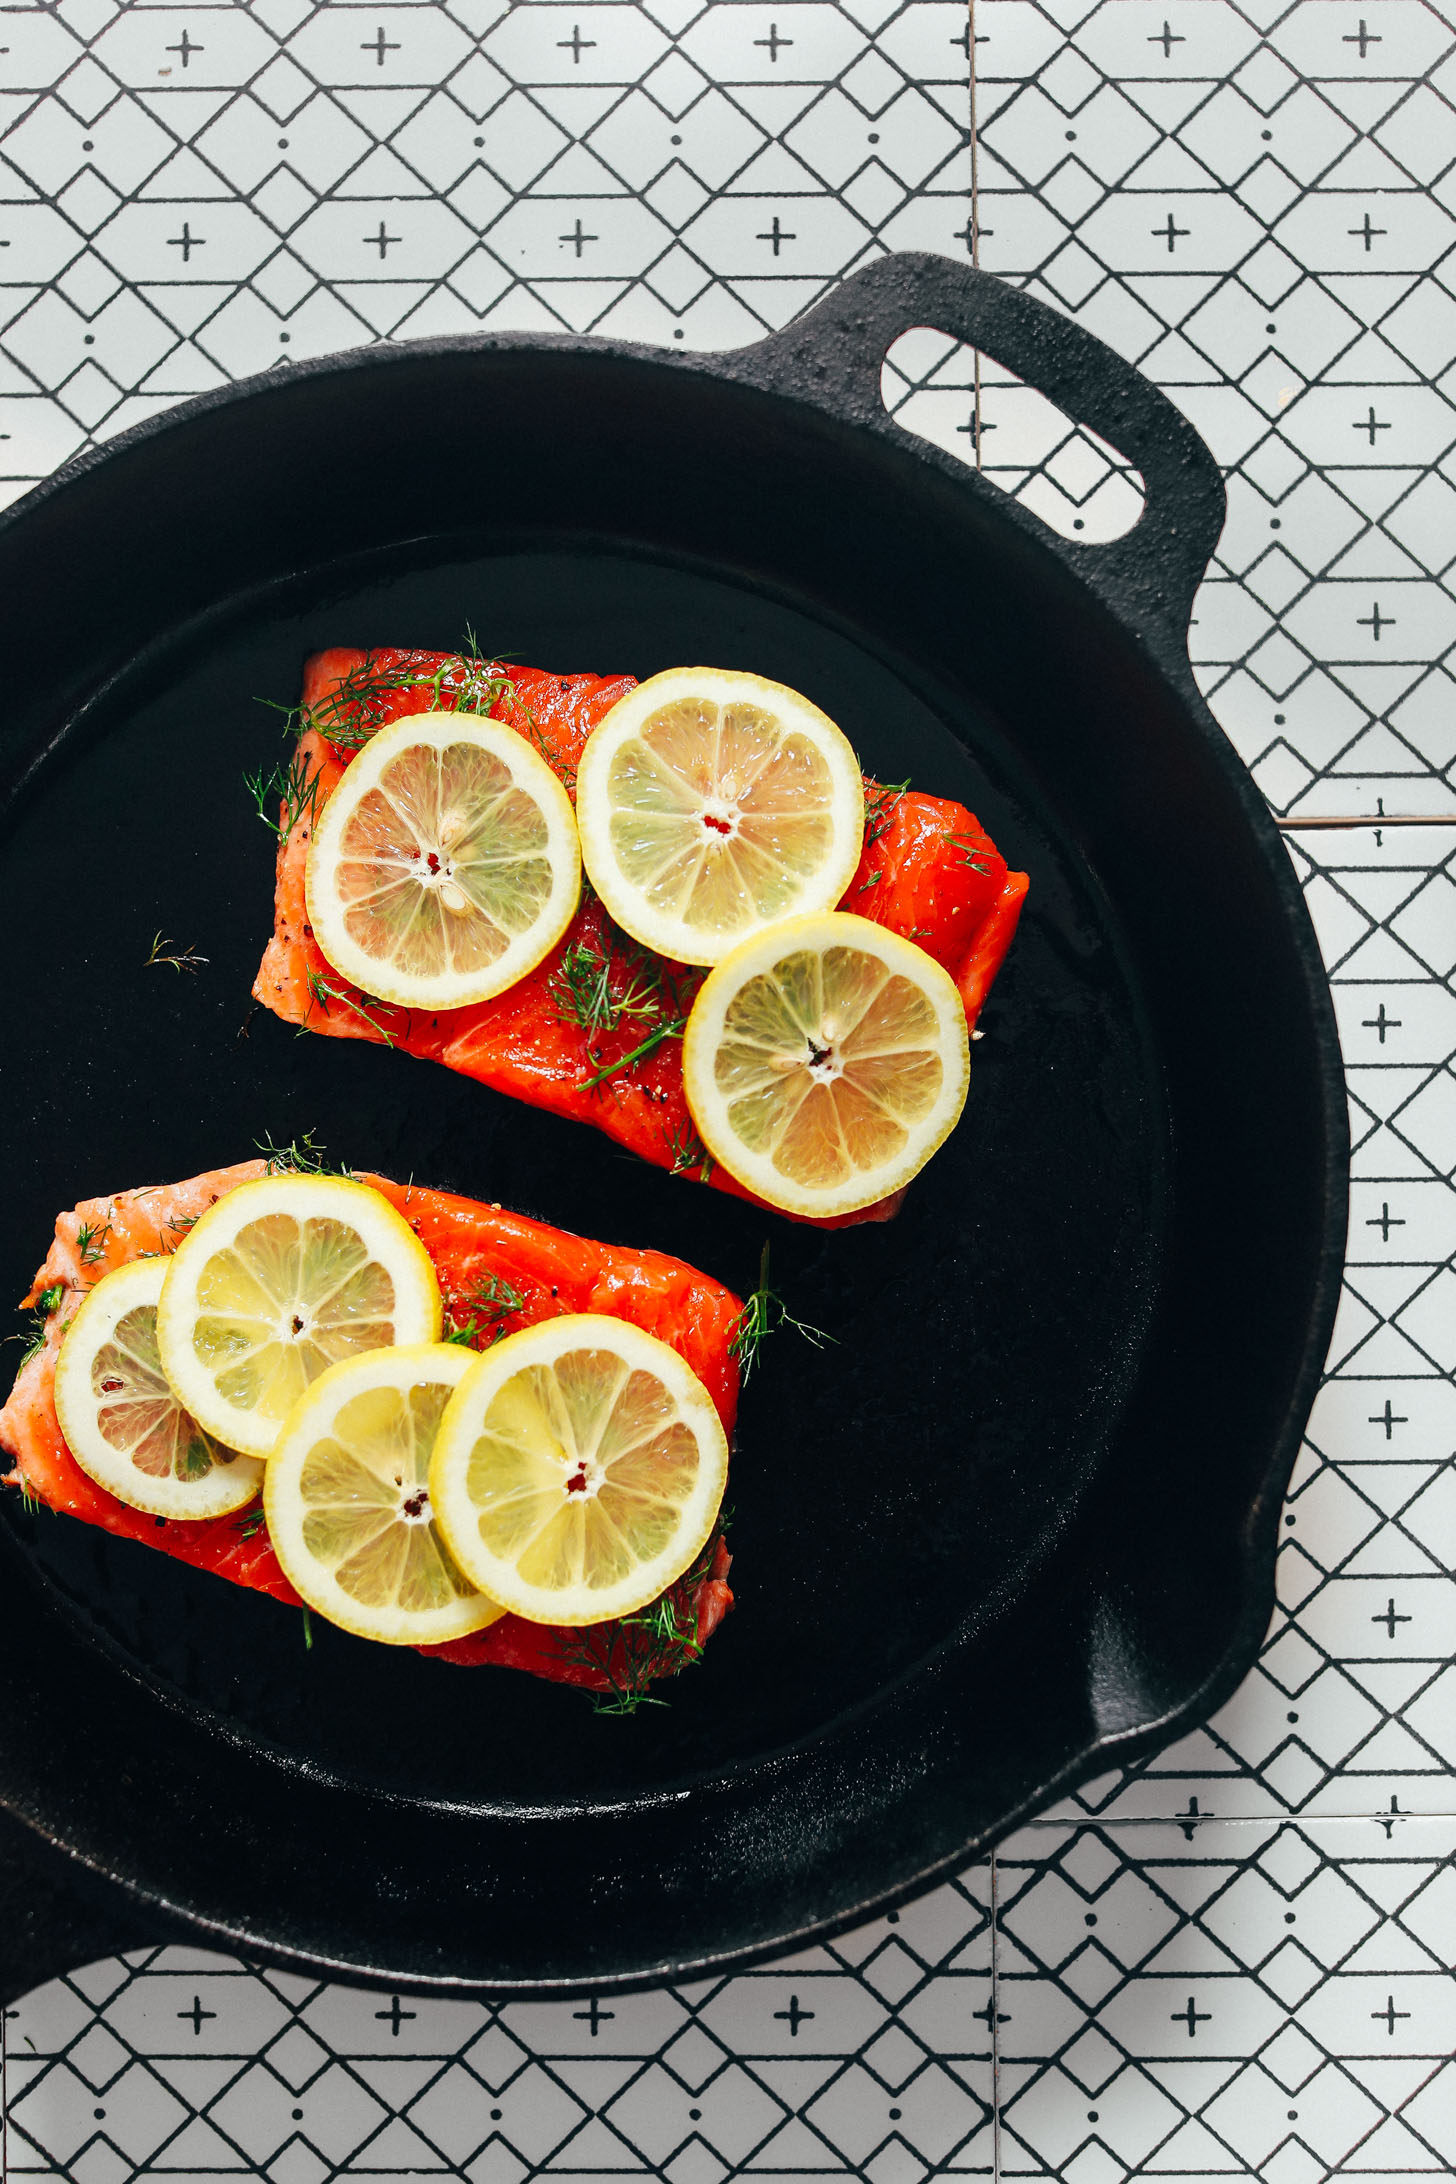 Cast-iron skillet with two filets of Lemon Baked Salmon with dill